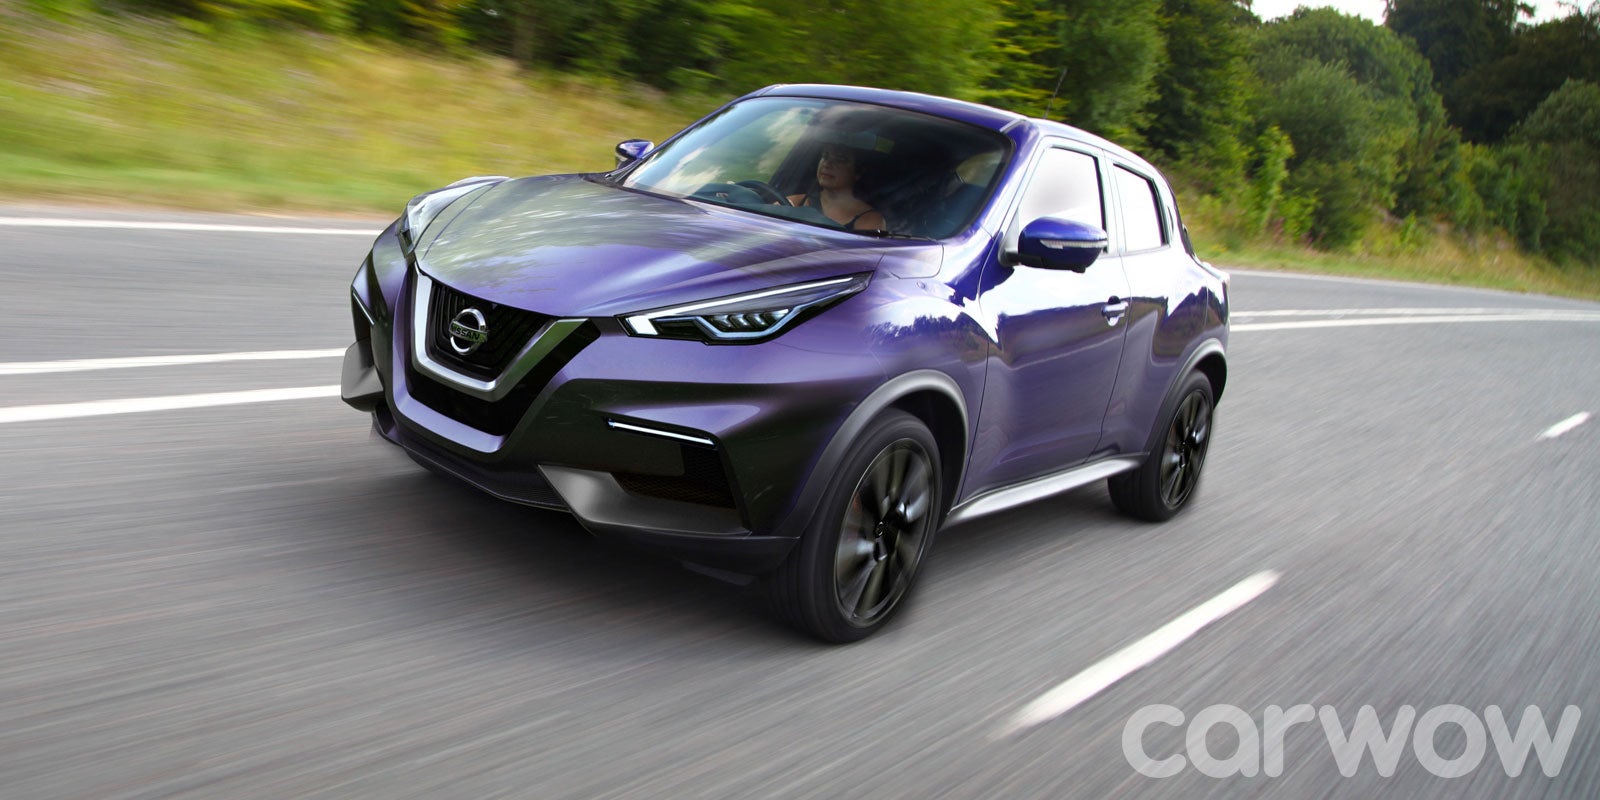 2017 Nissan Juke price, specs and release date | carwow